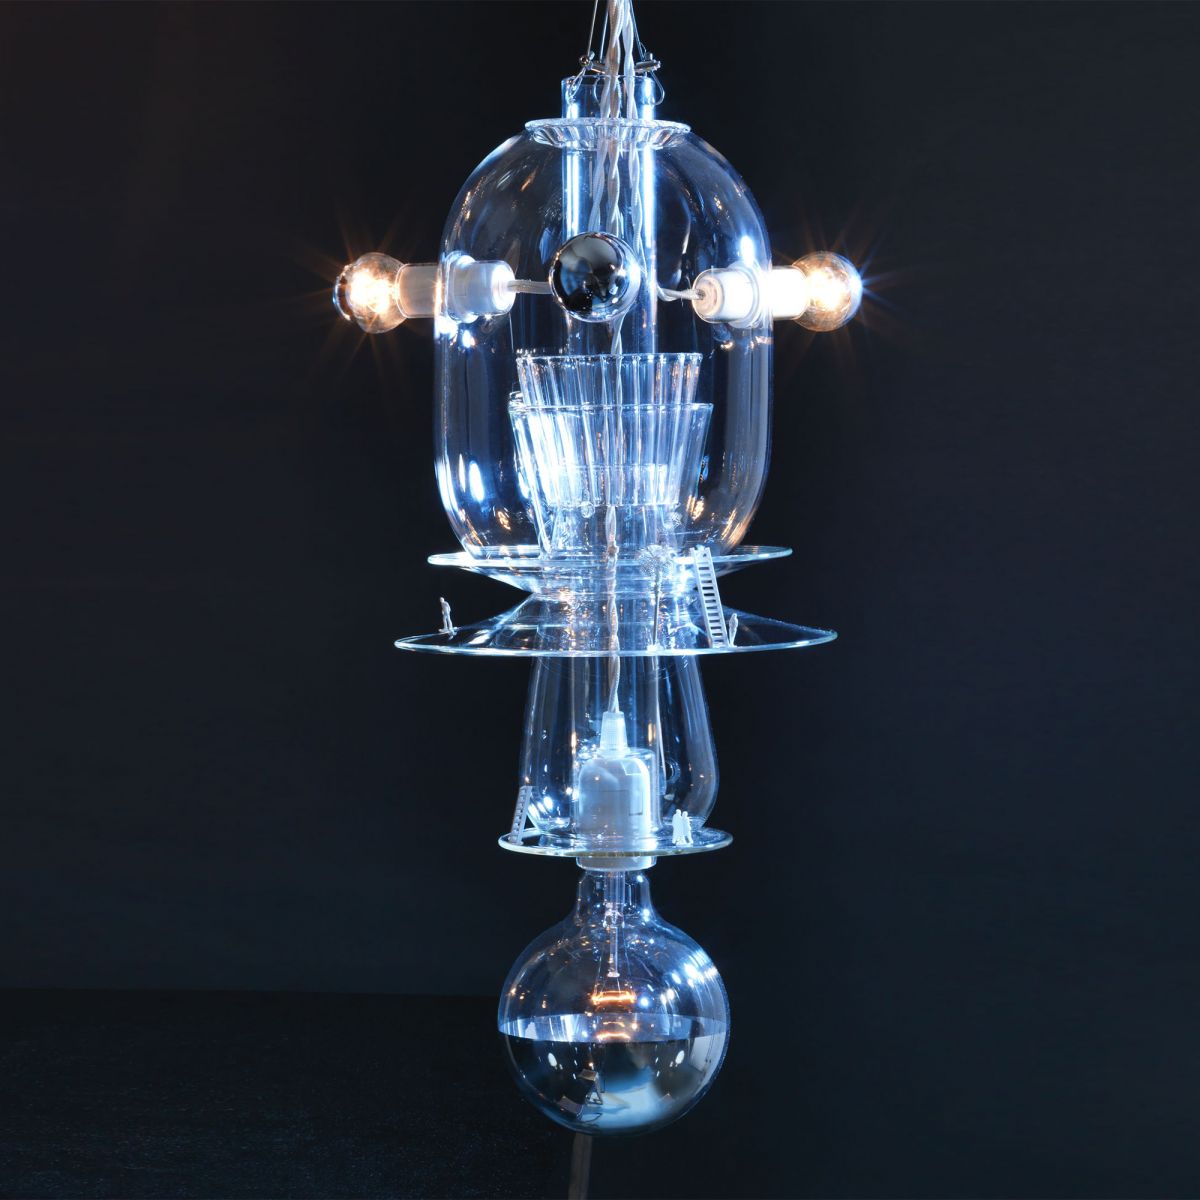 Ceiling/table lamp 'Totem 1' Bethan Laura Wood pic-1